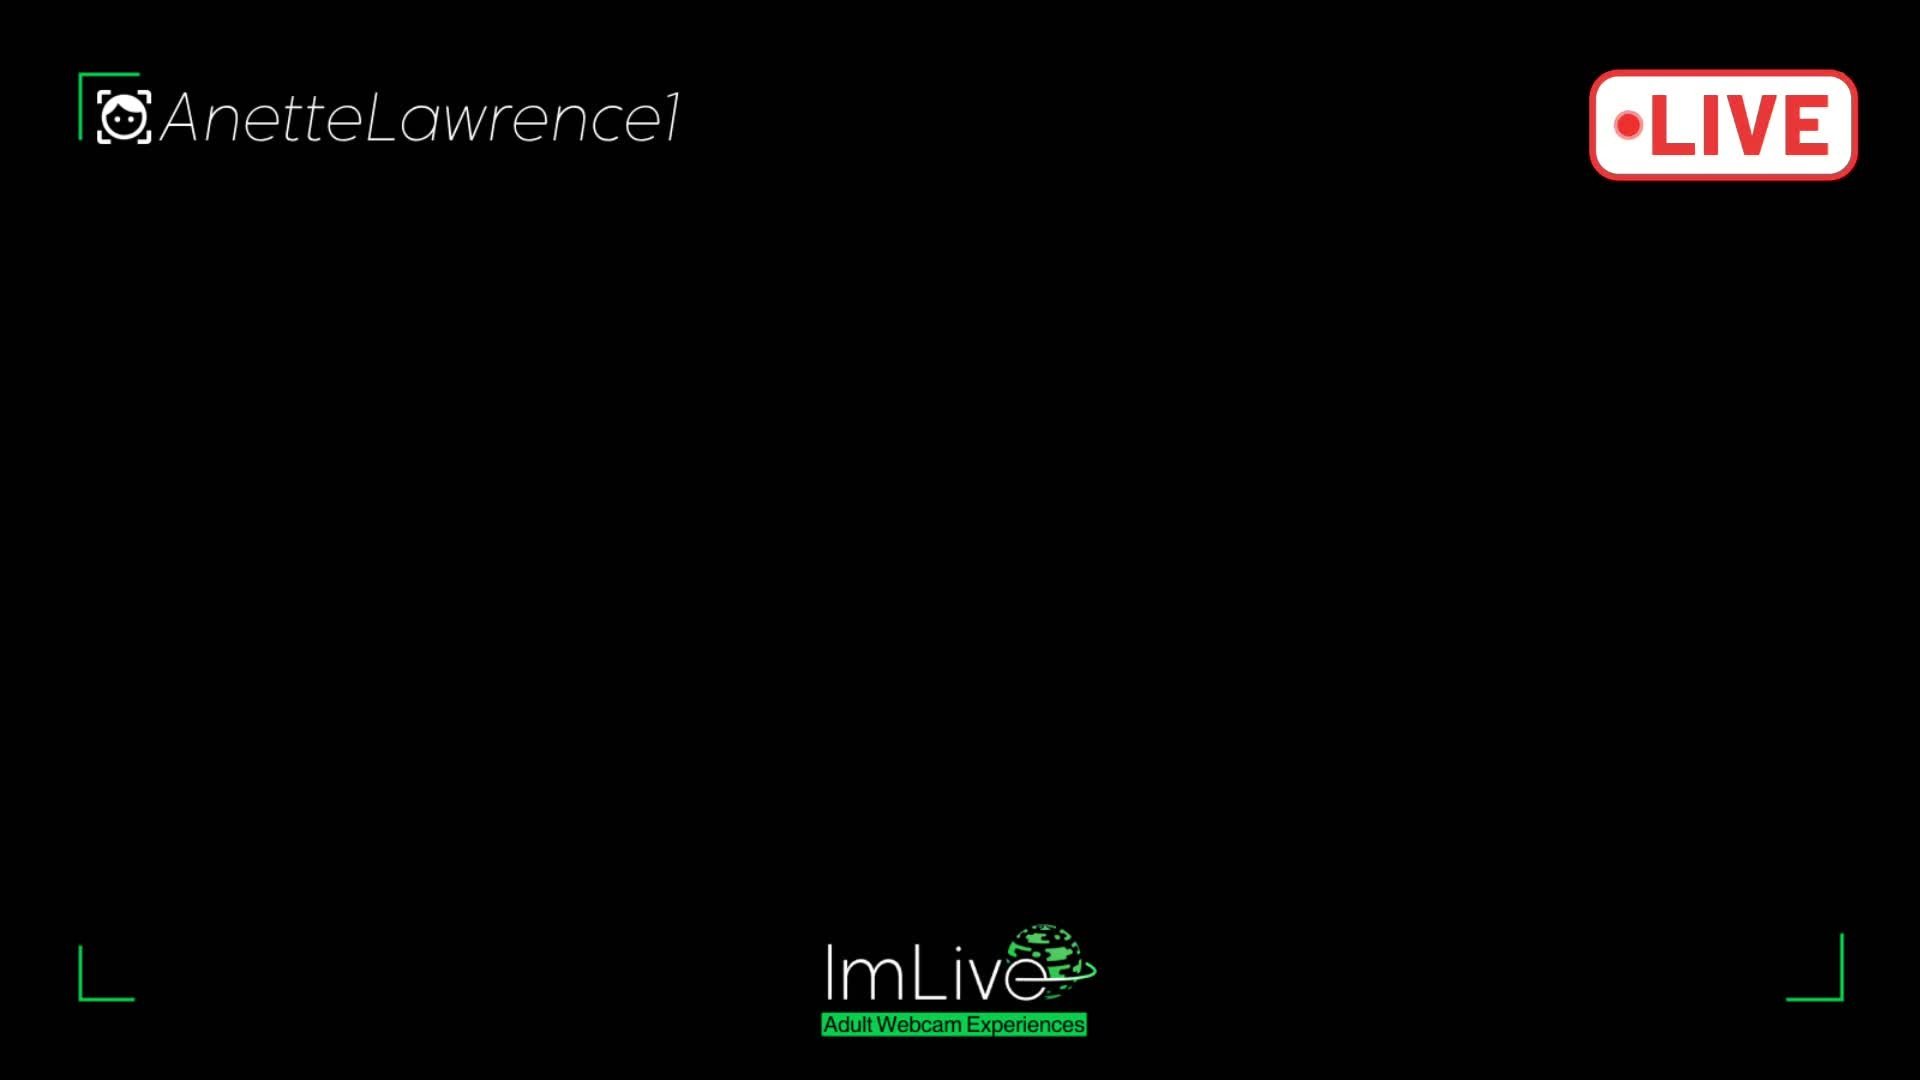 Video post by ImLive